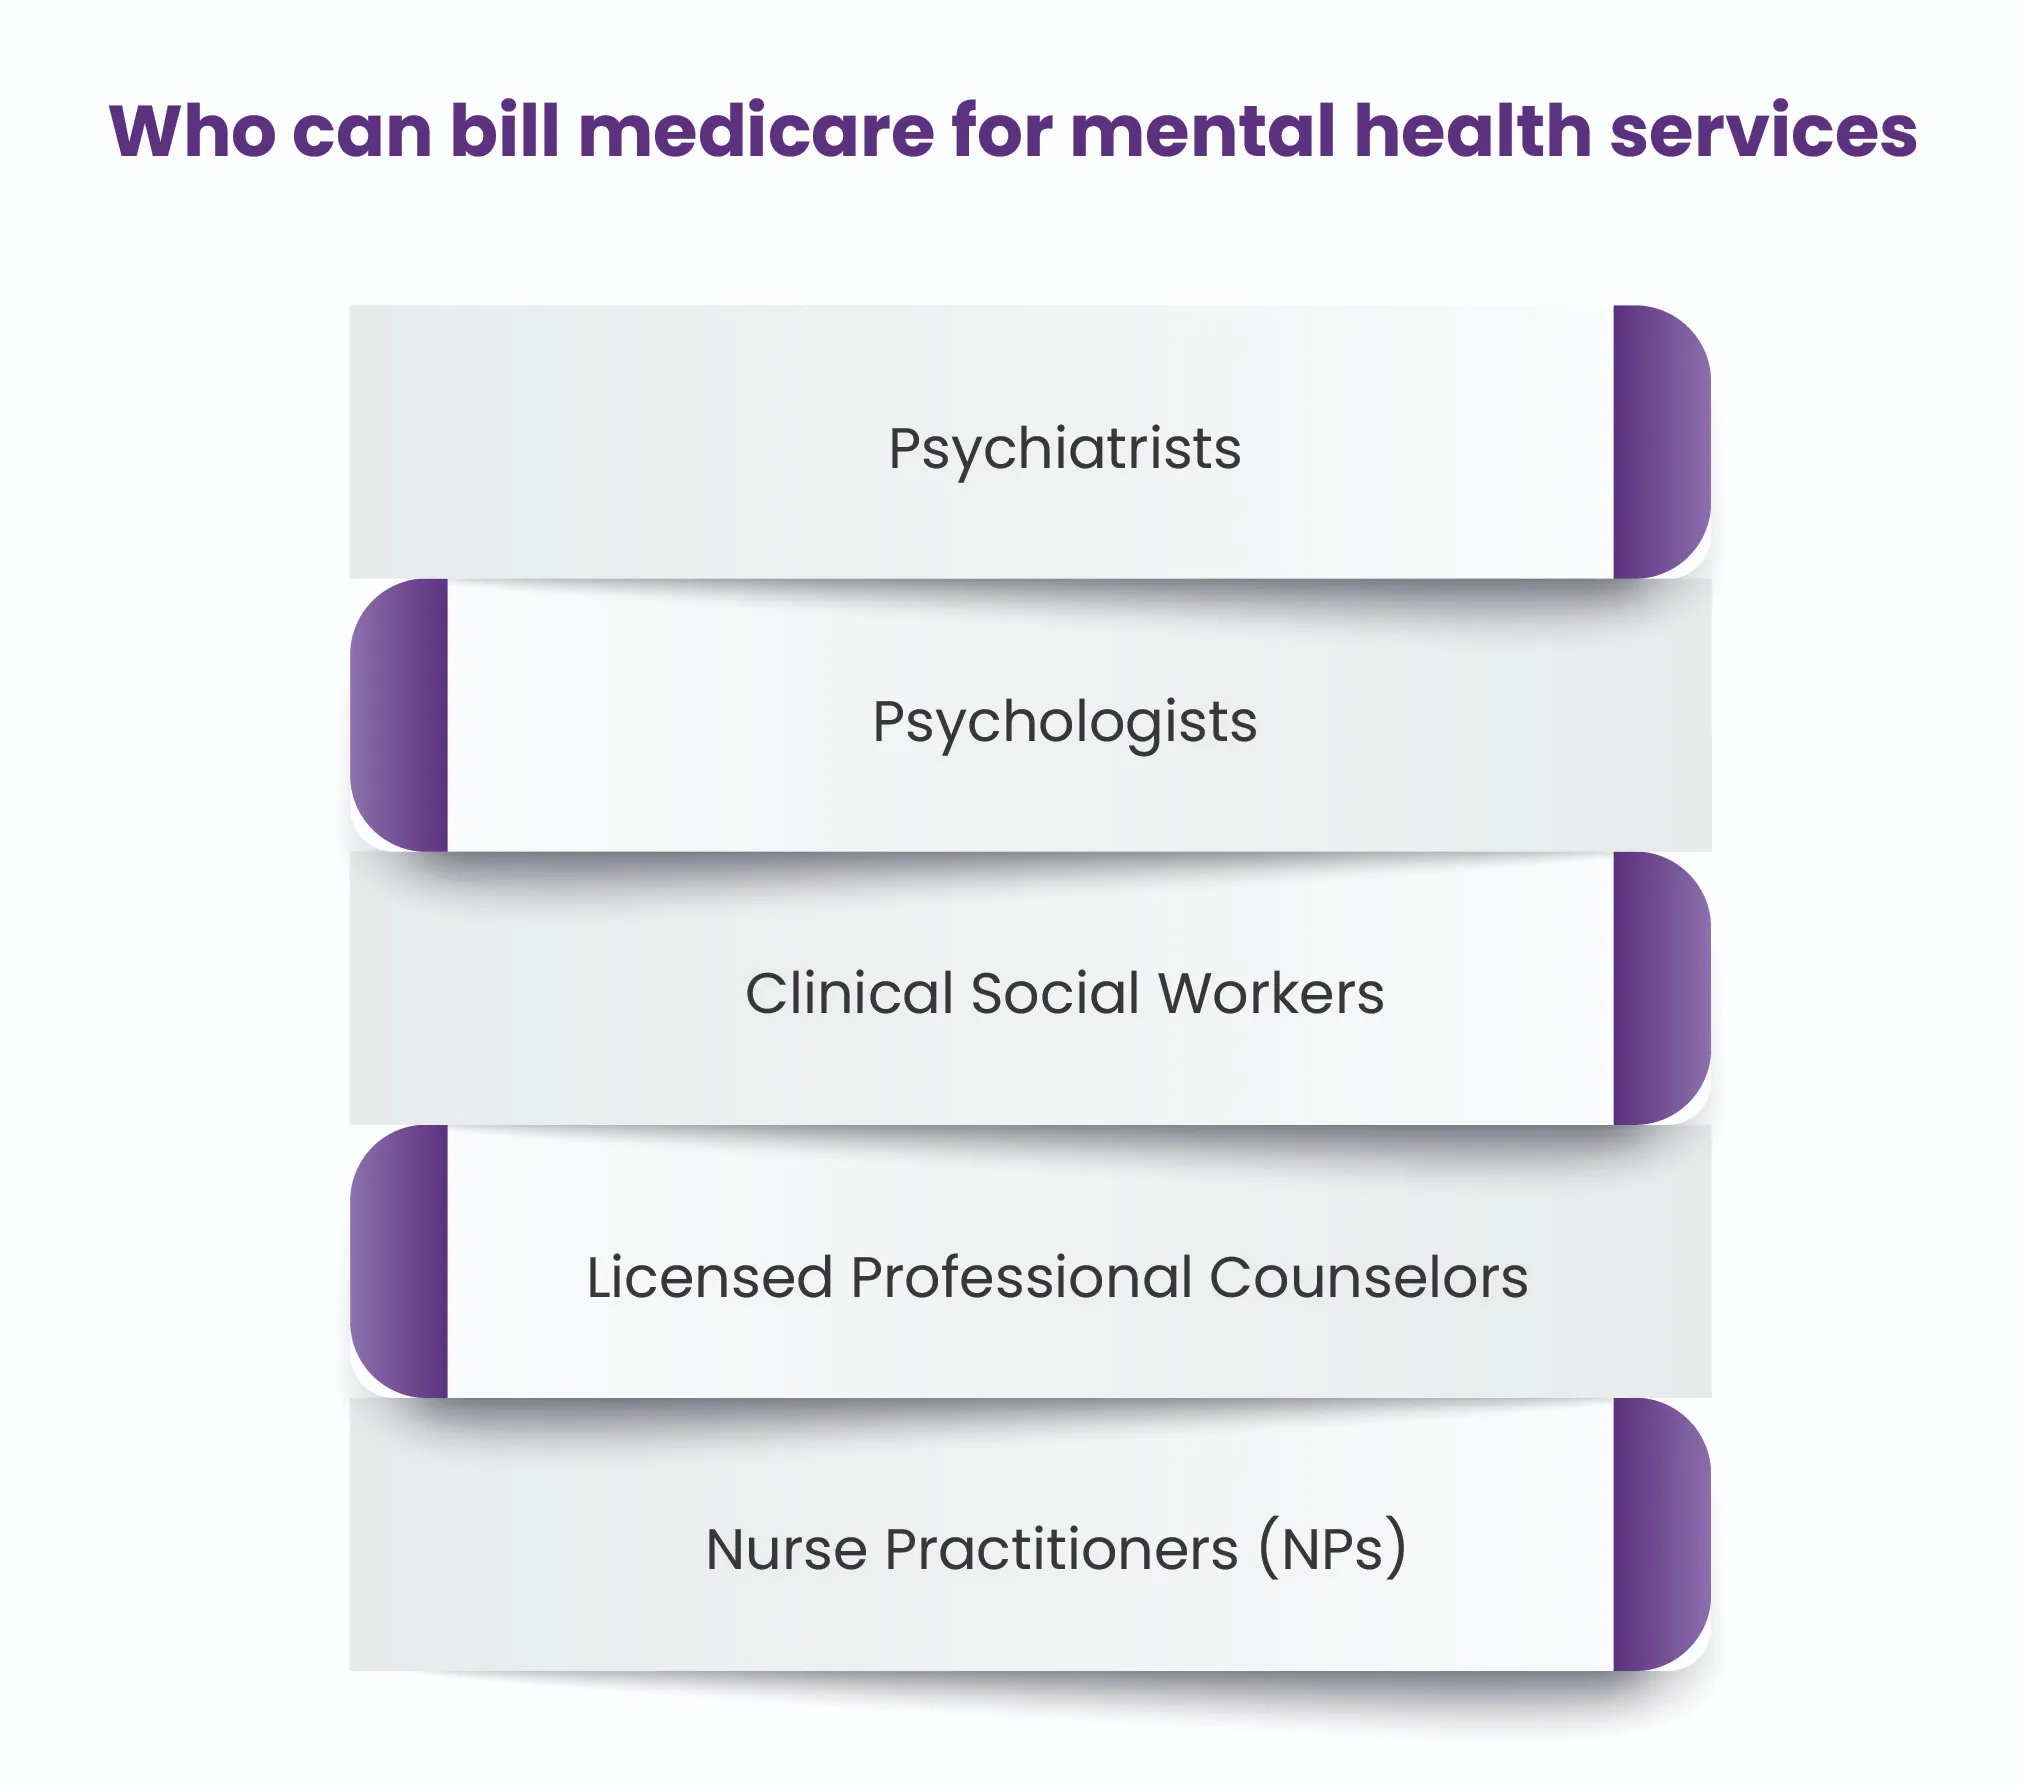 who-can-bill-for-mental-health-services